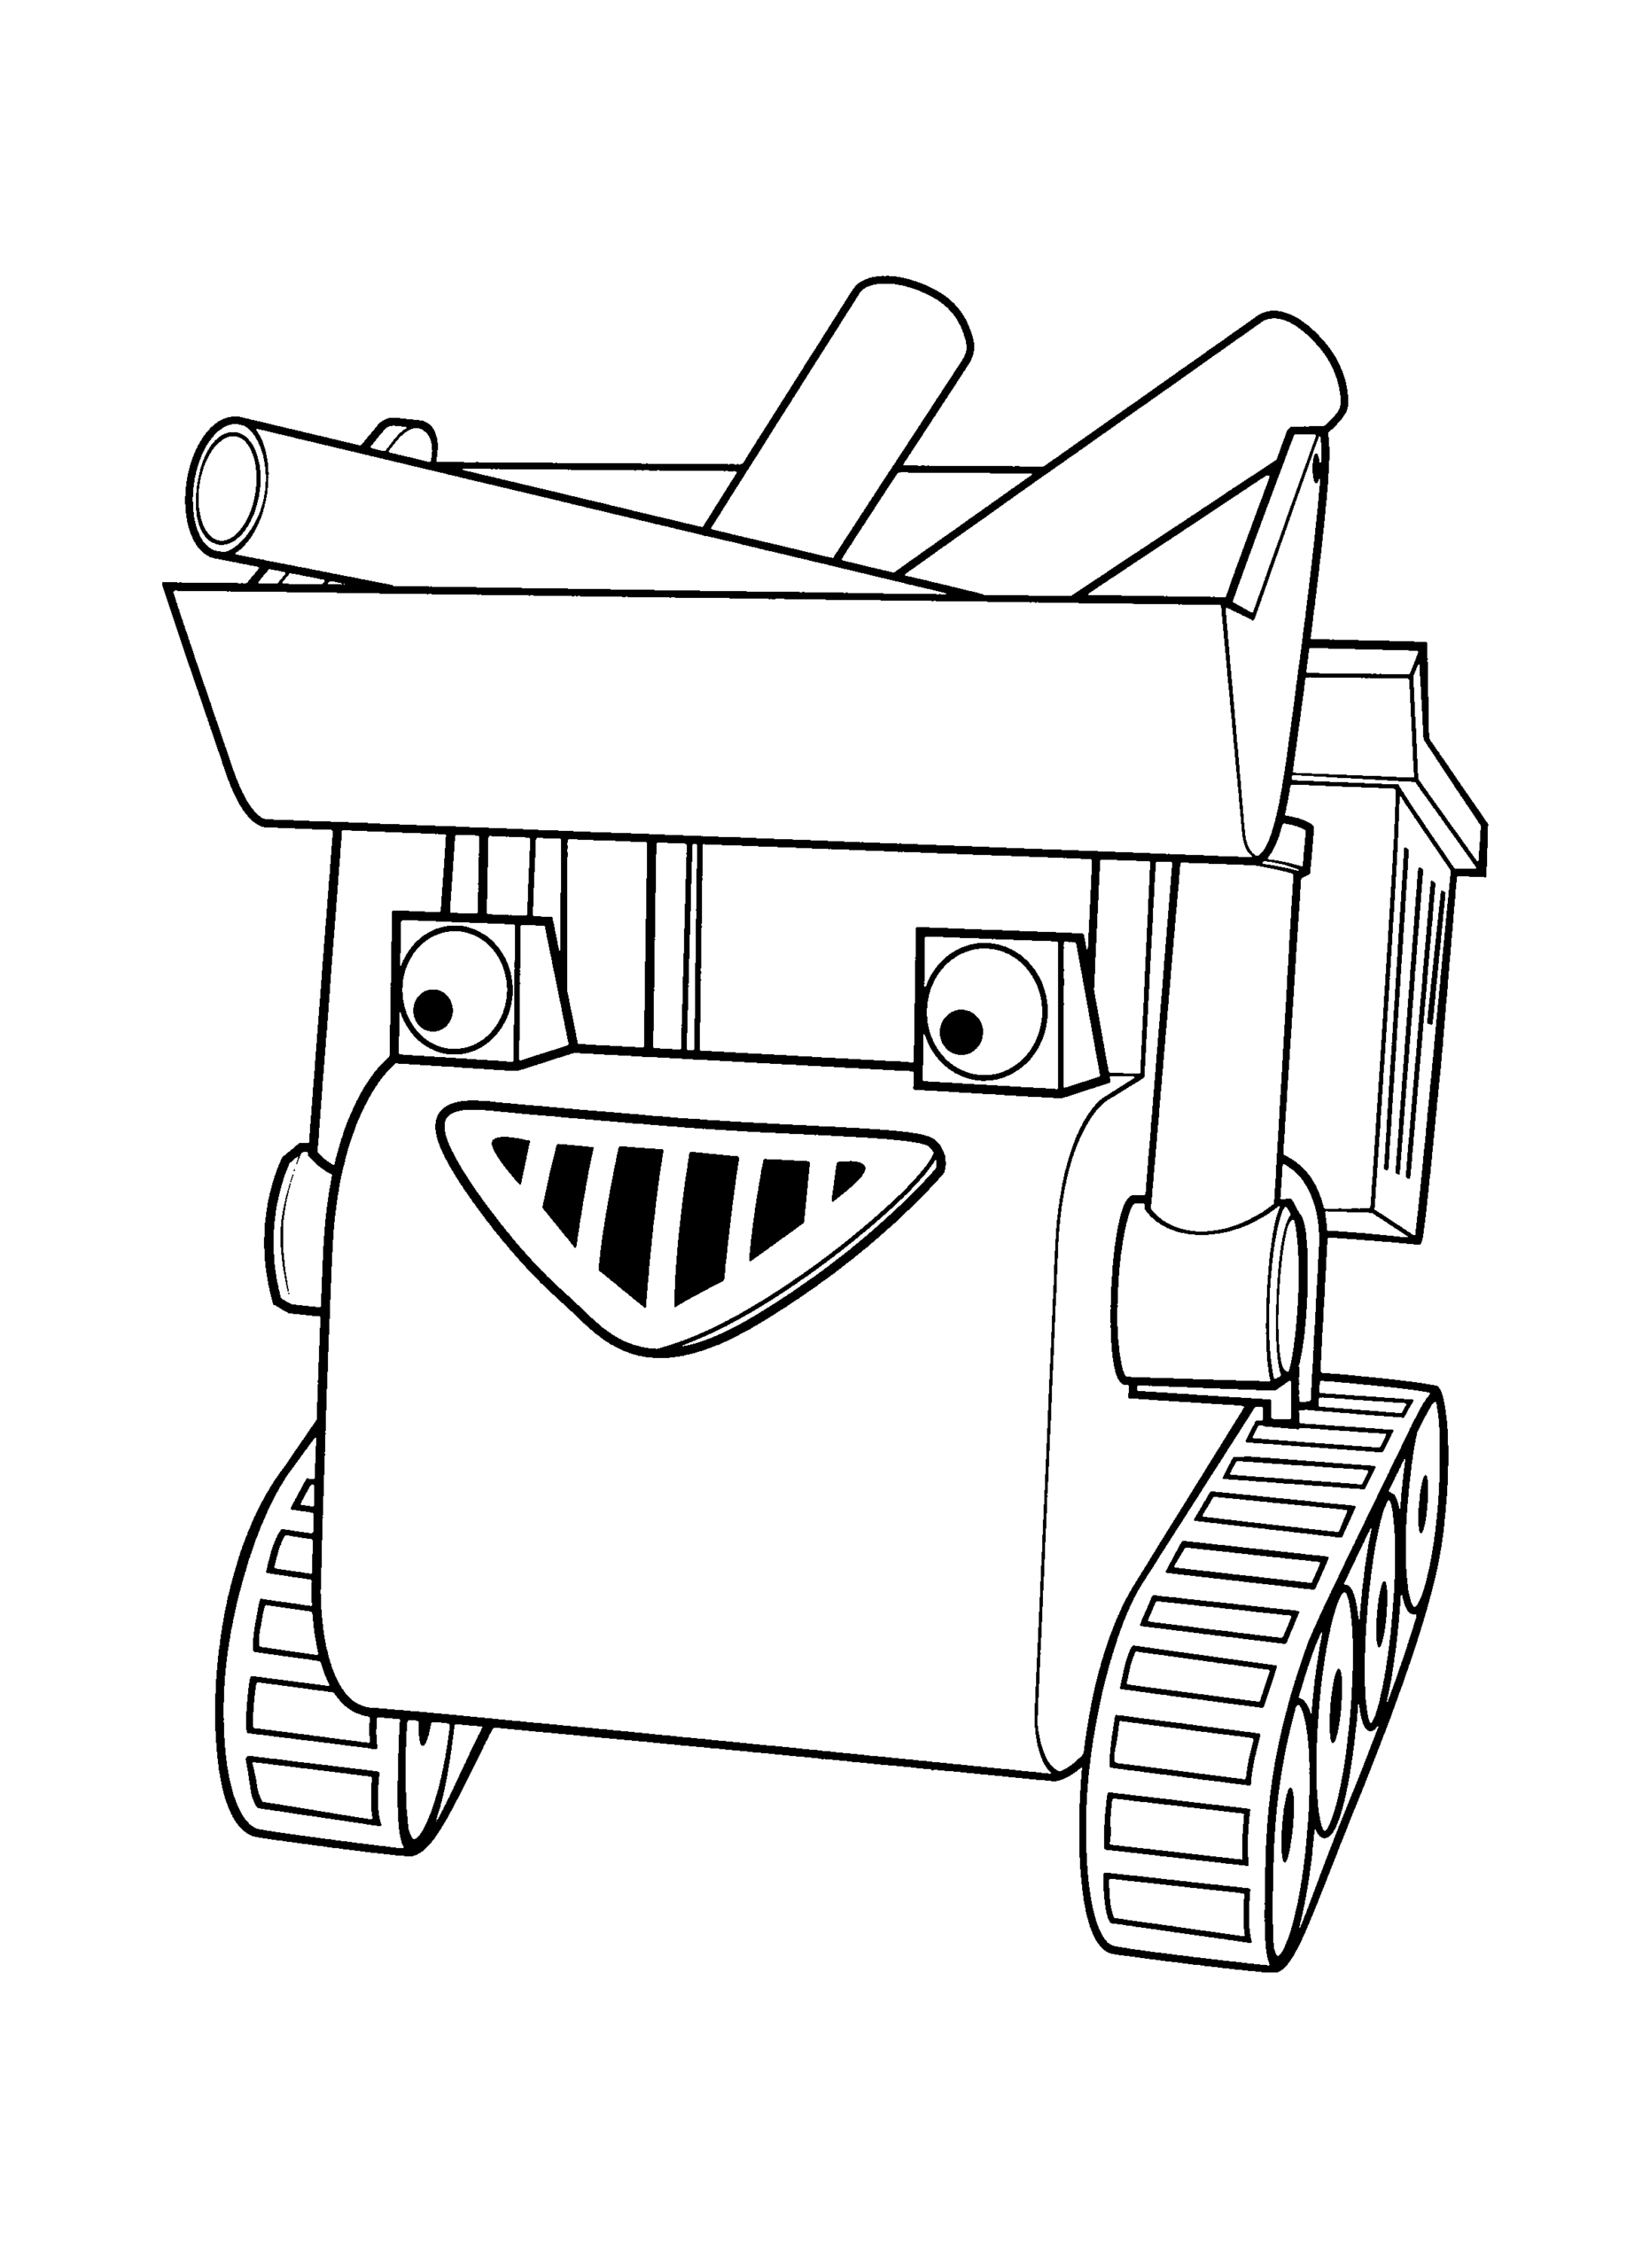 Bob the Builder Coloring Pages TV Film bob the builder 27 Printable 2020 01045 Coloring4free